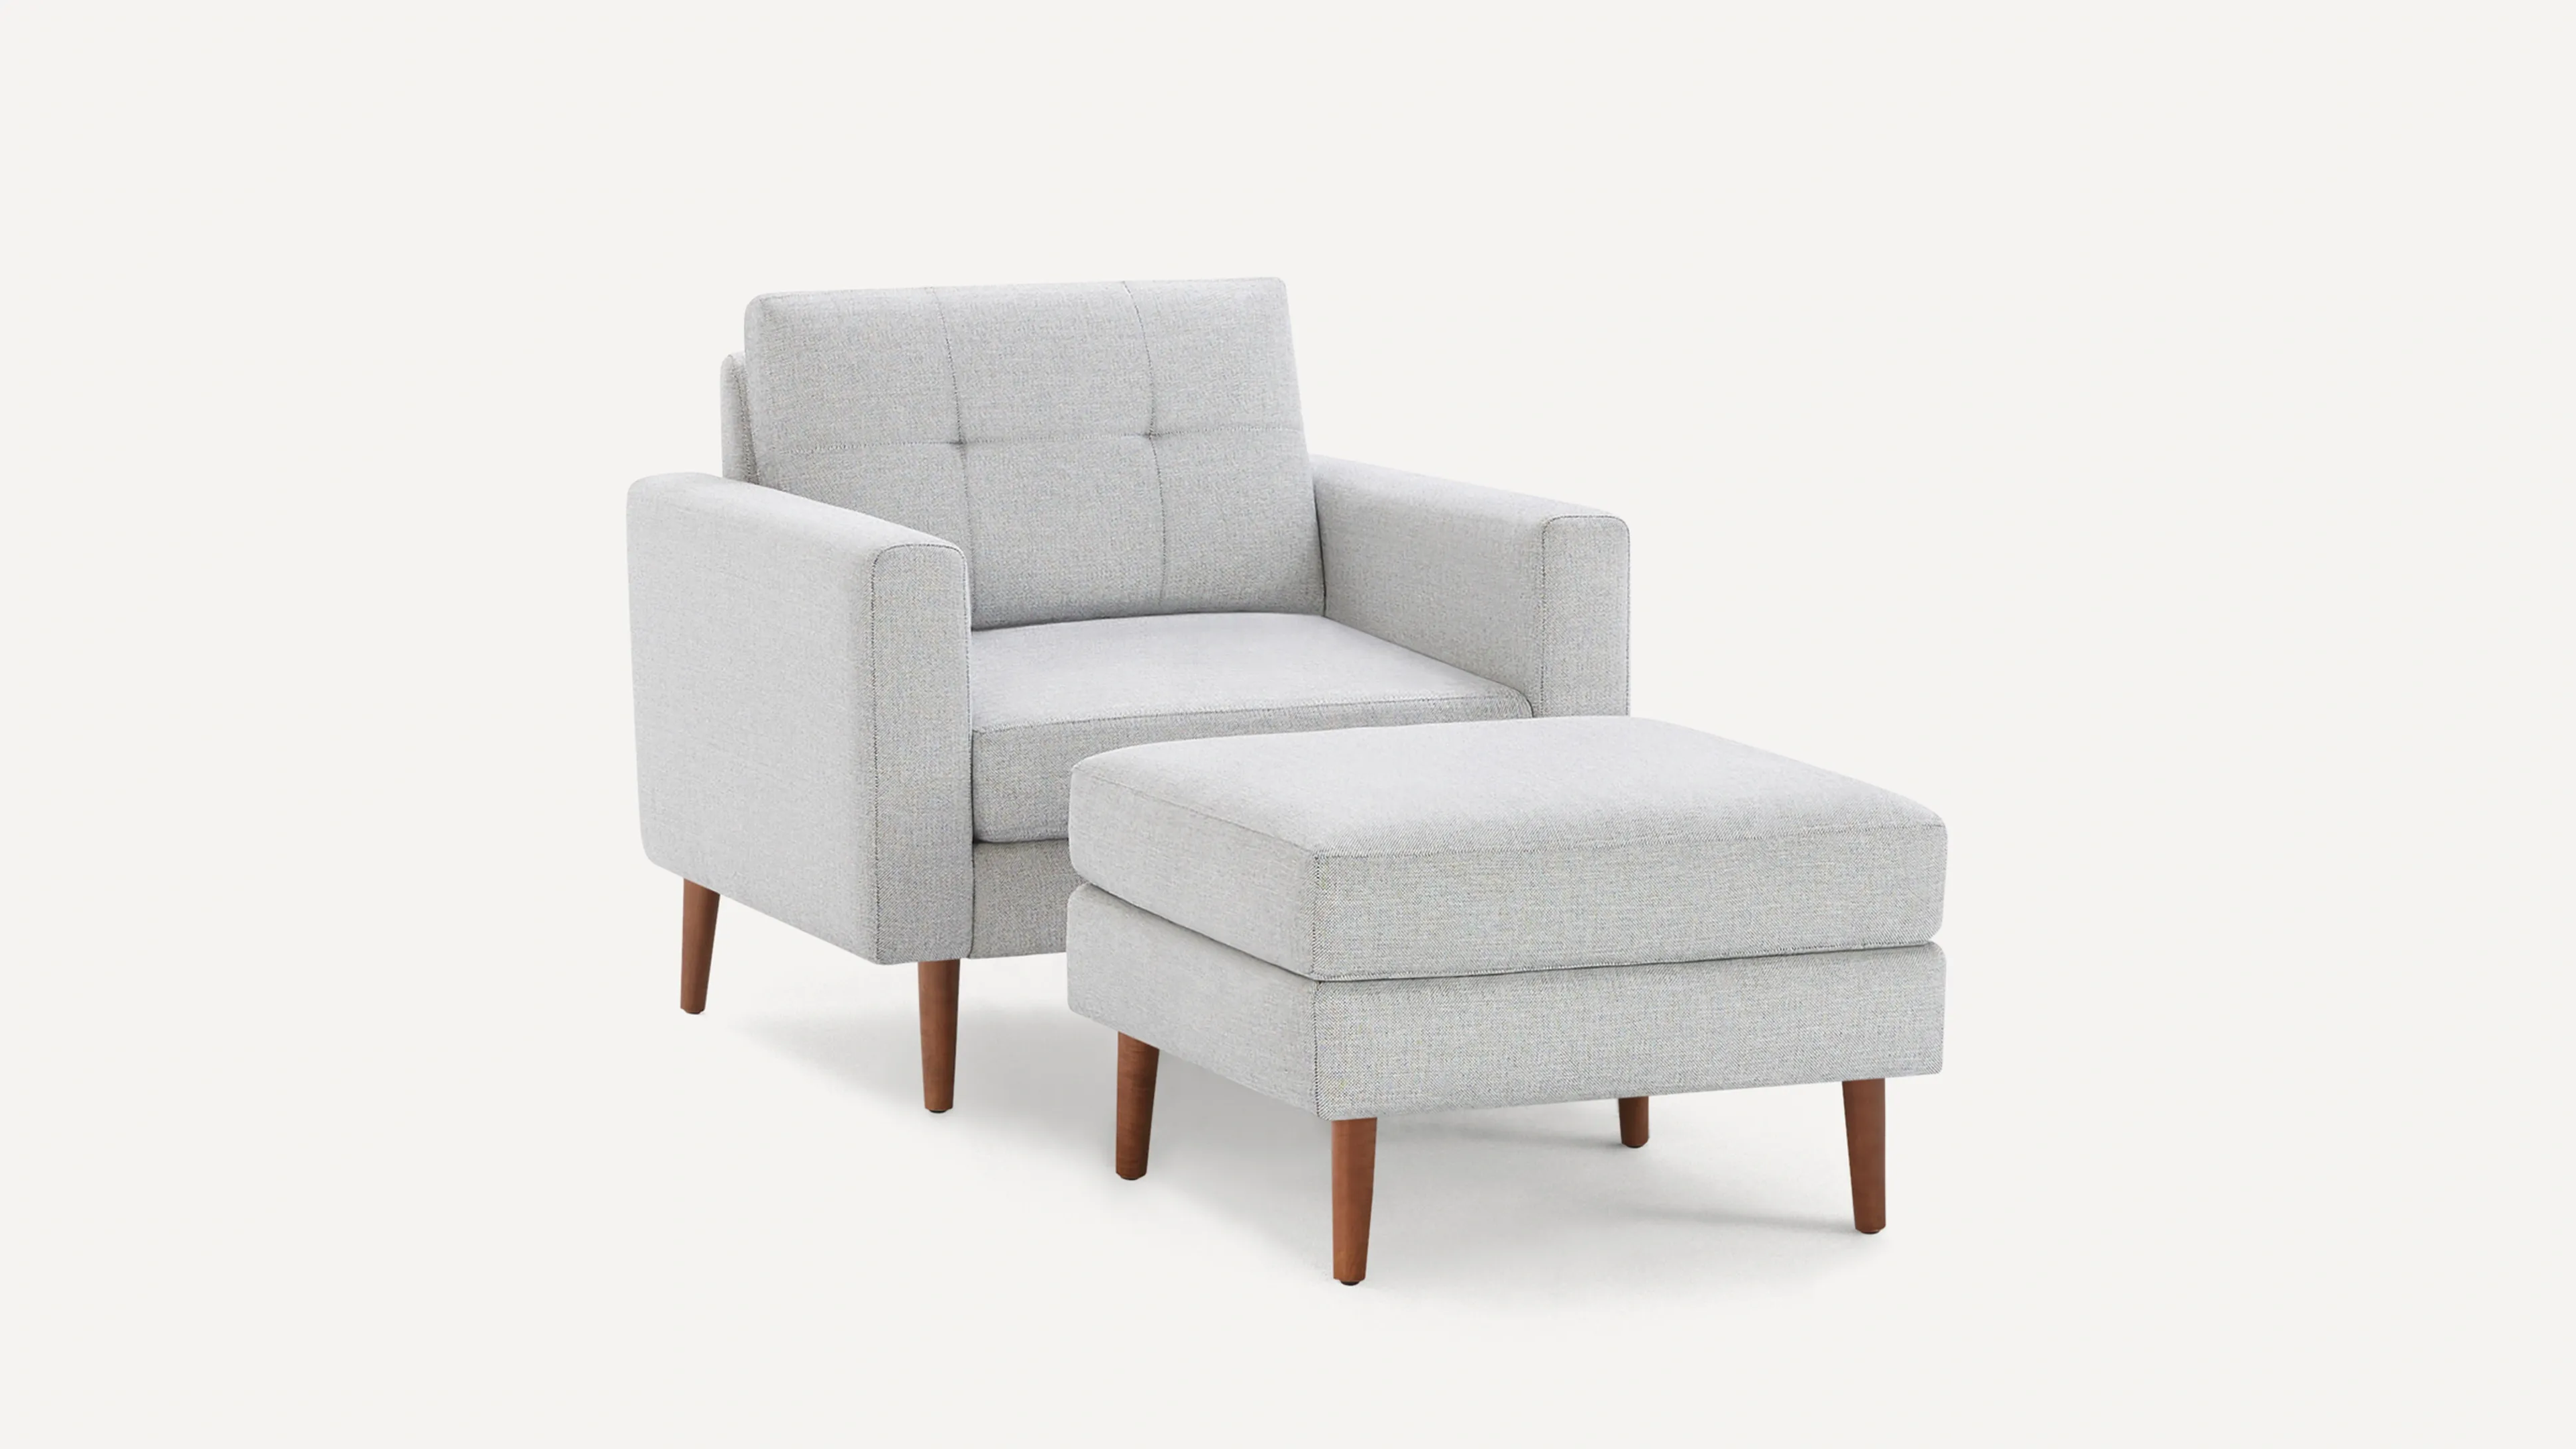 Original Nomad Armchair with Ottoman in Crushed Gravel Fabric